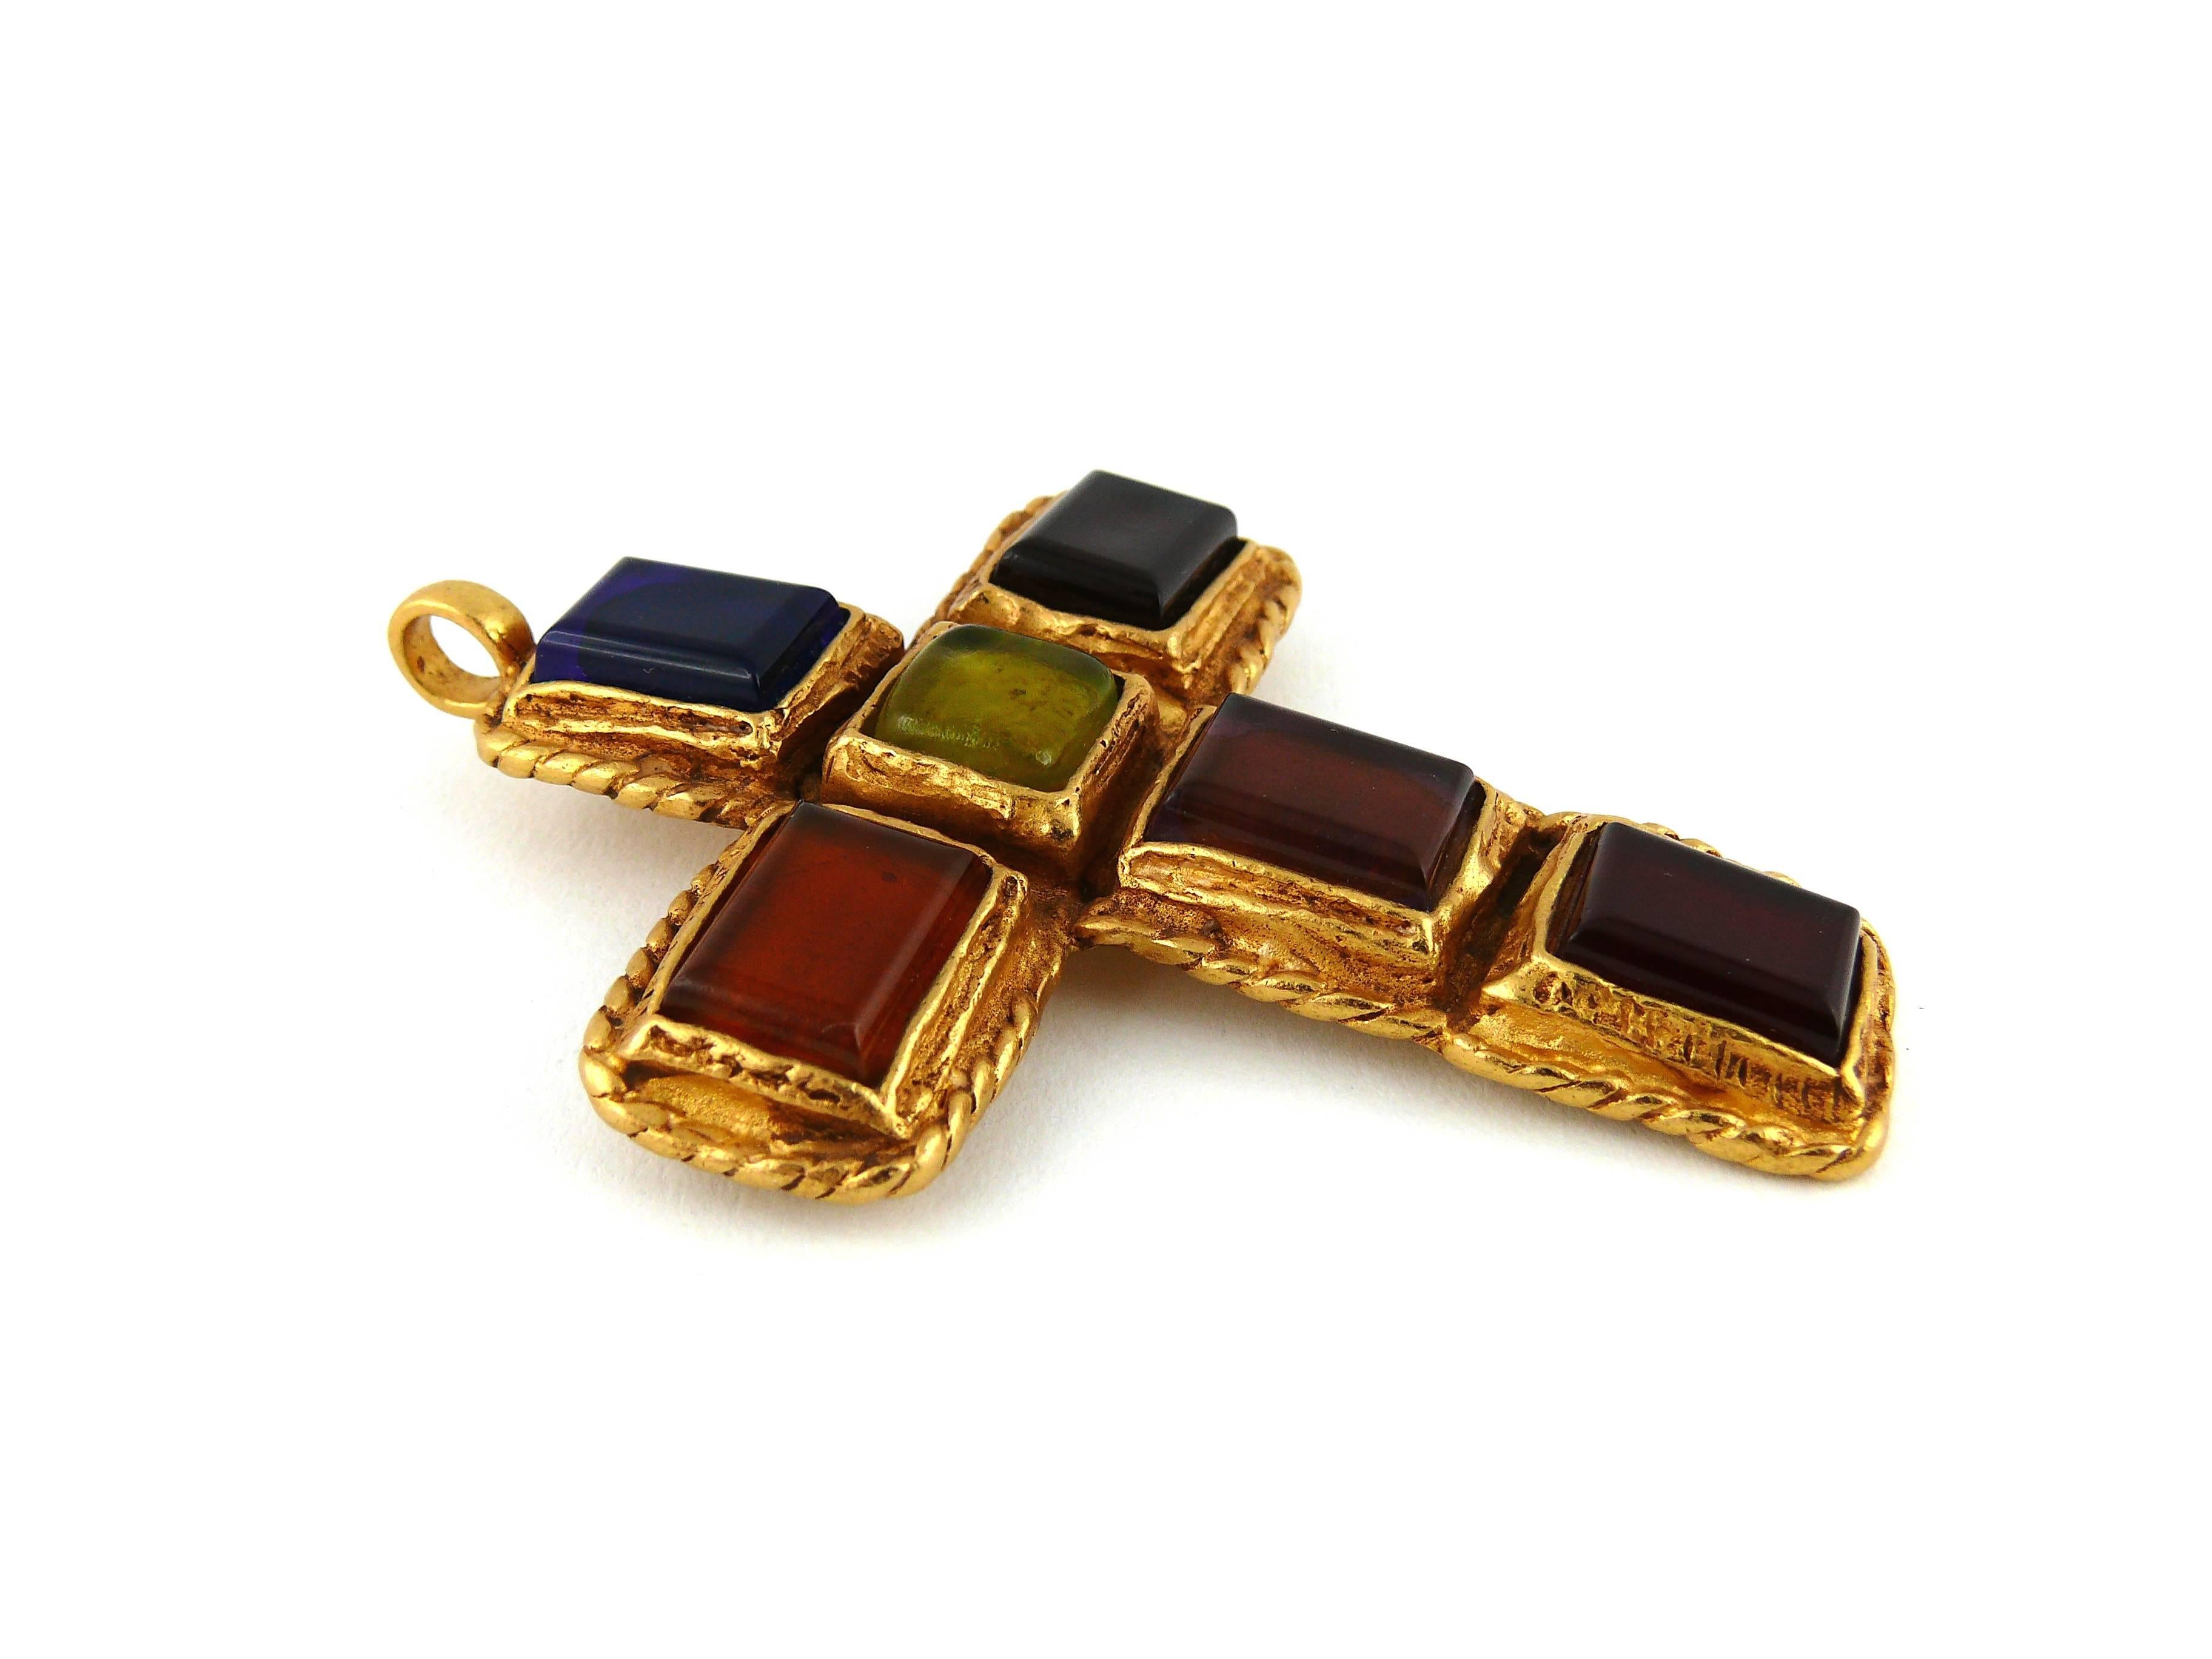 CHRISTIAN LACROIX vintage massive cross brooch pendant.

Multi colored pate de verre cabochons in a textured gold tone setting.

Can be worn as a brooch or a pendant.

Marked CHRISTIAN LACROIX CL Made in France.

Indicative measurements : total